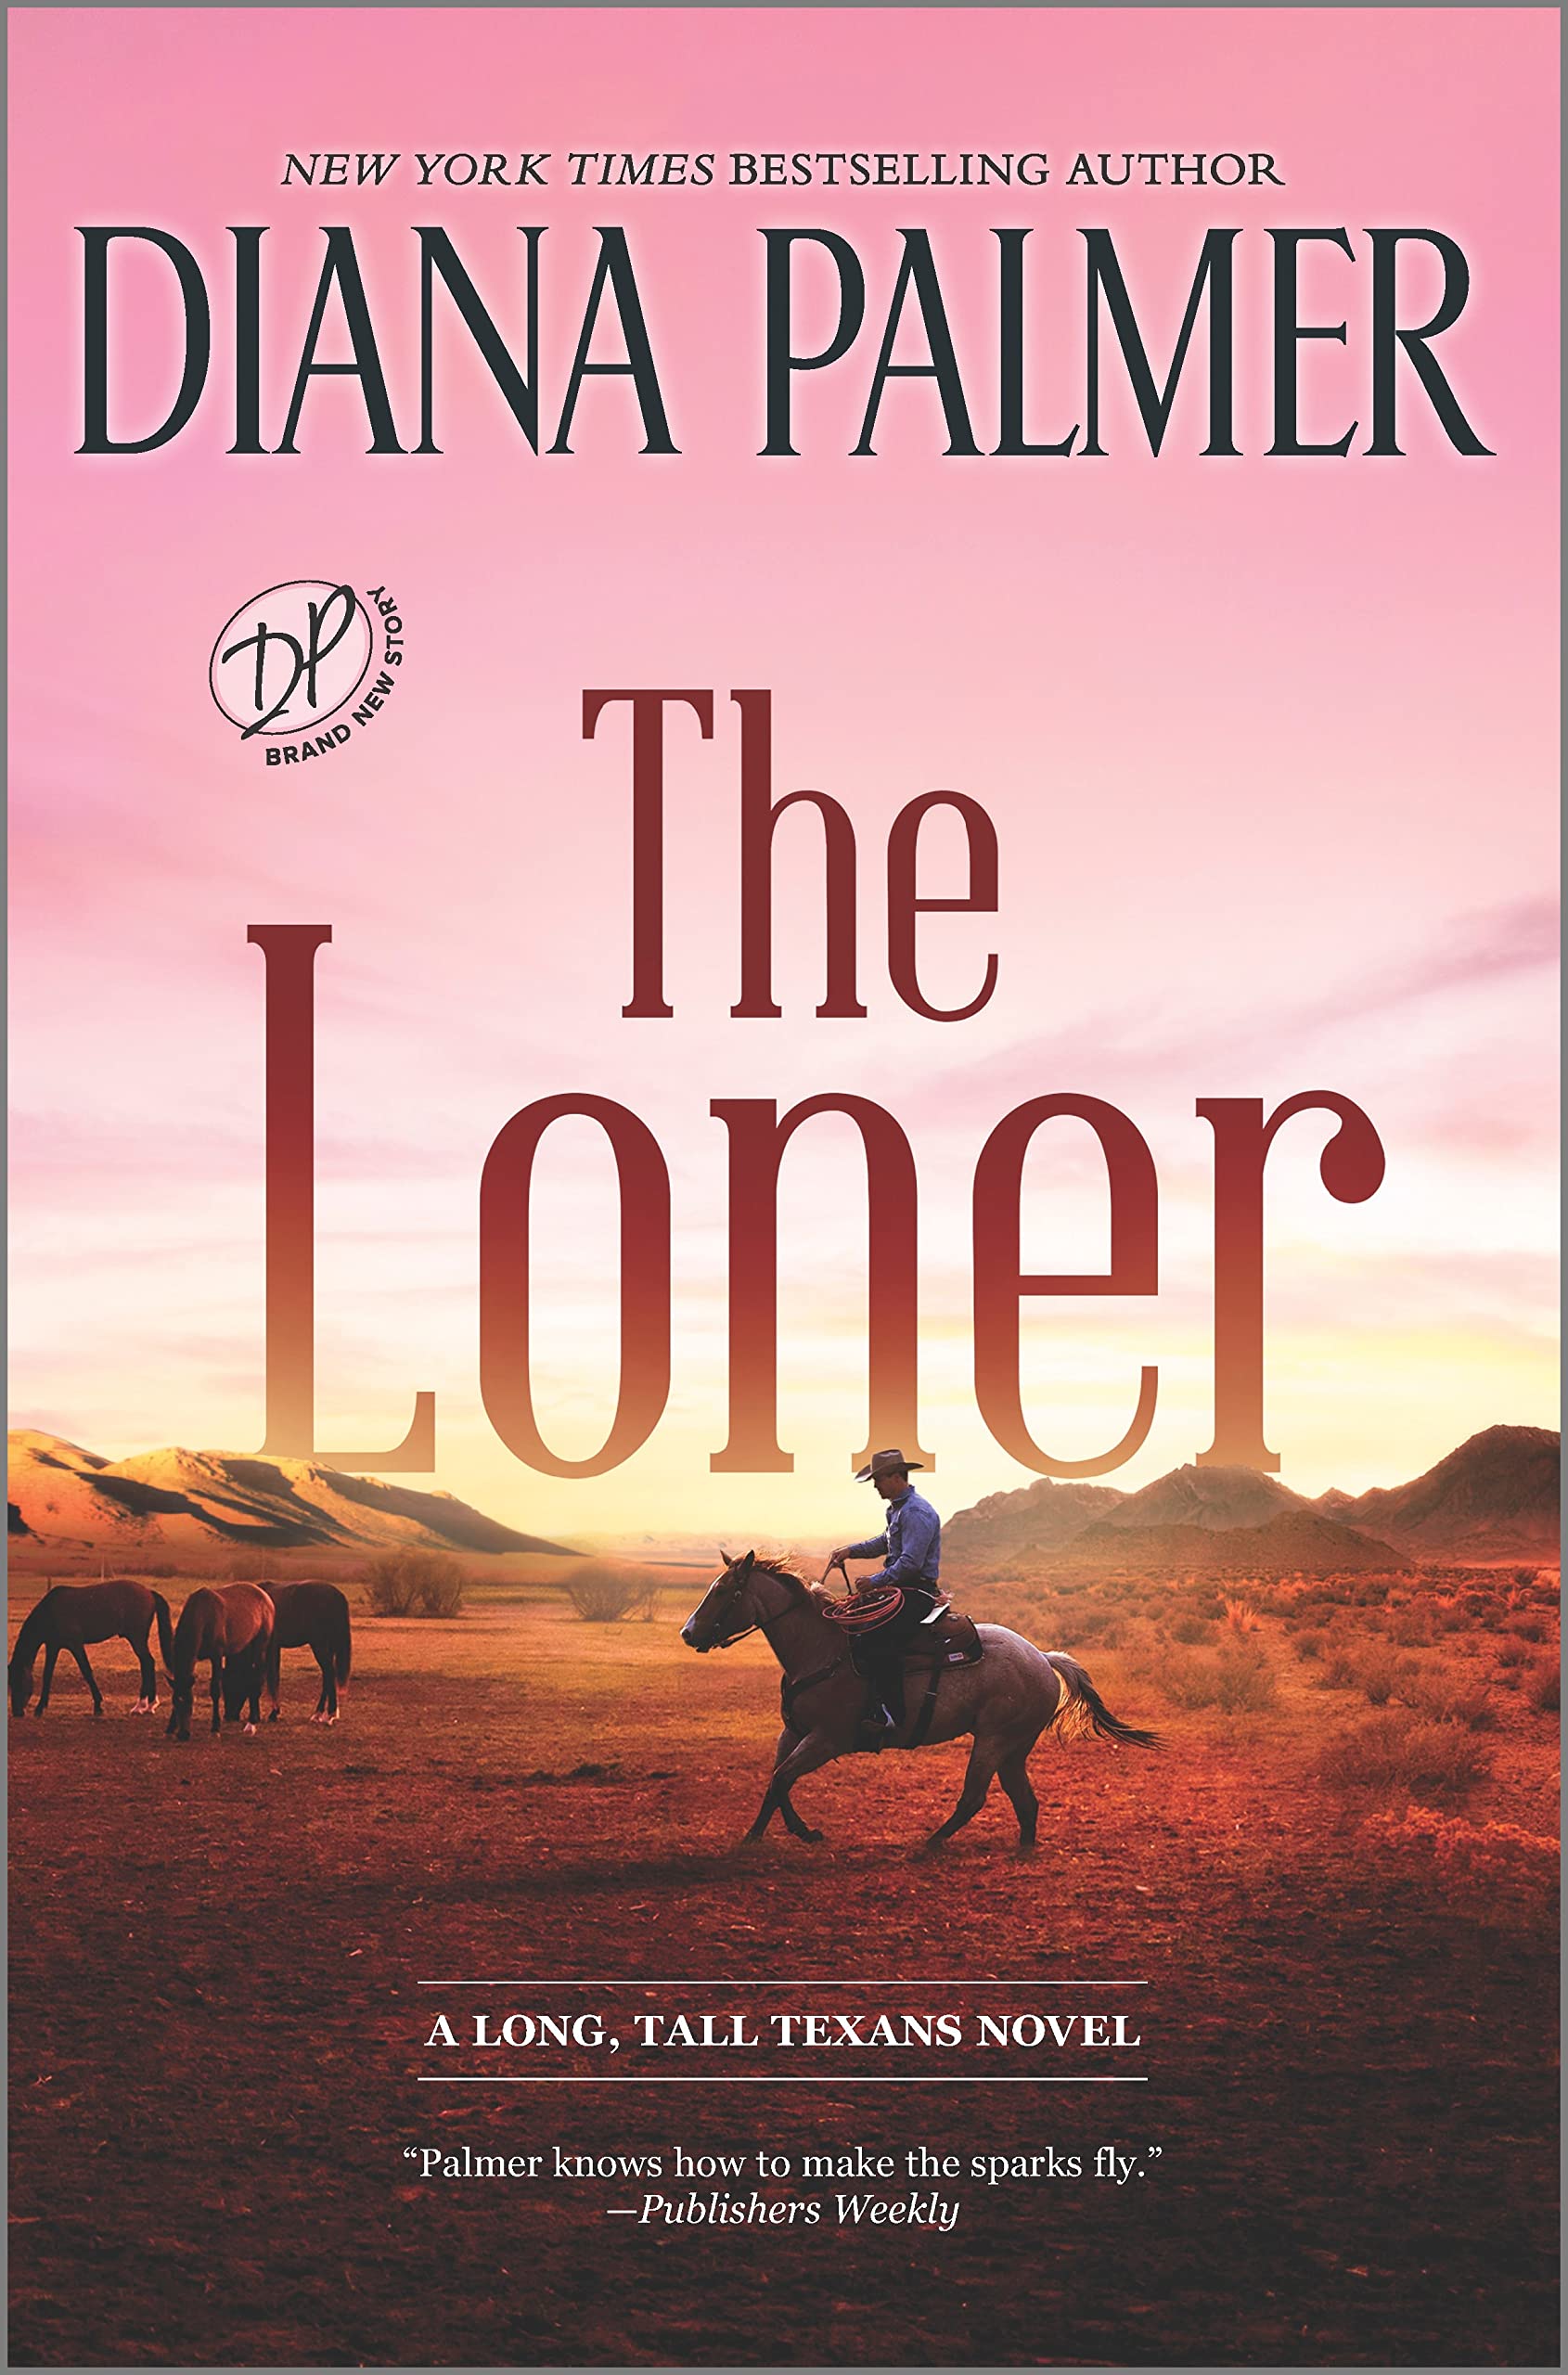 Image for "The Loner"